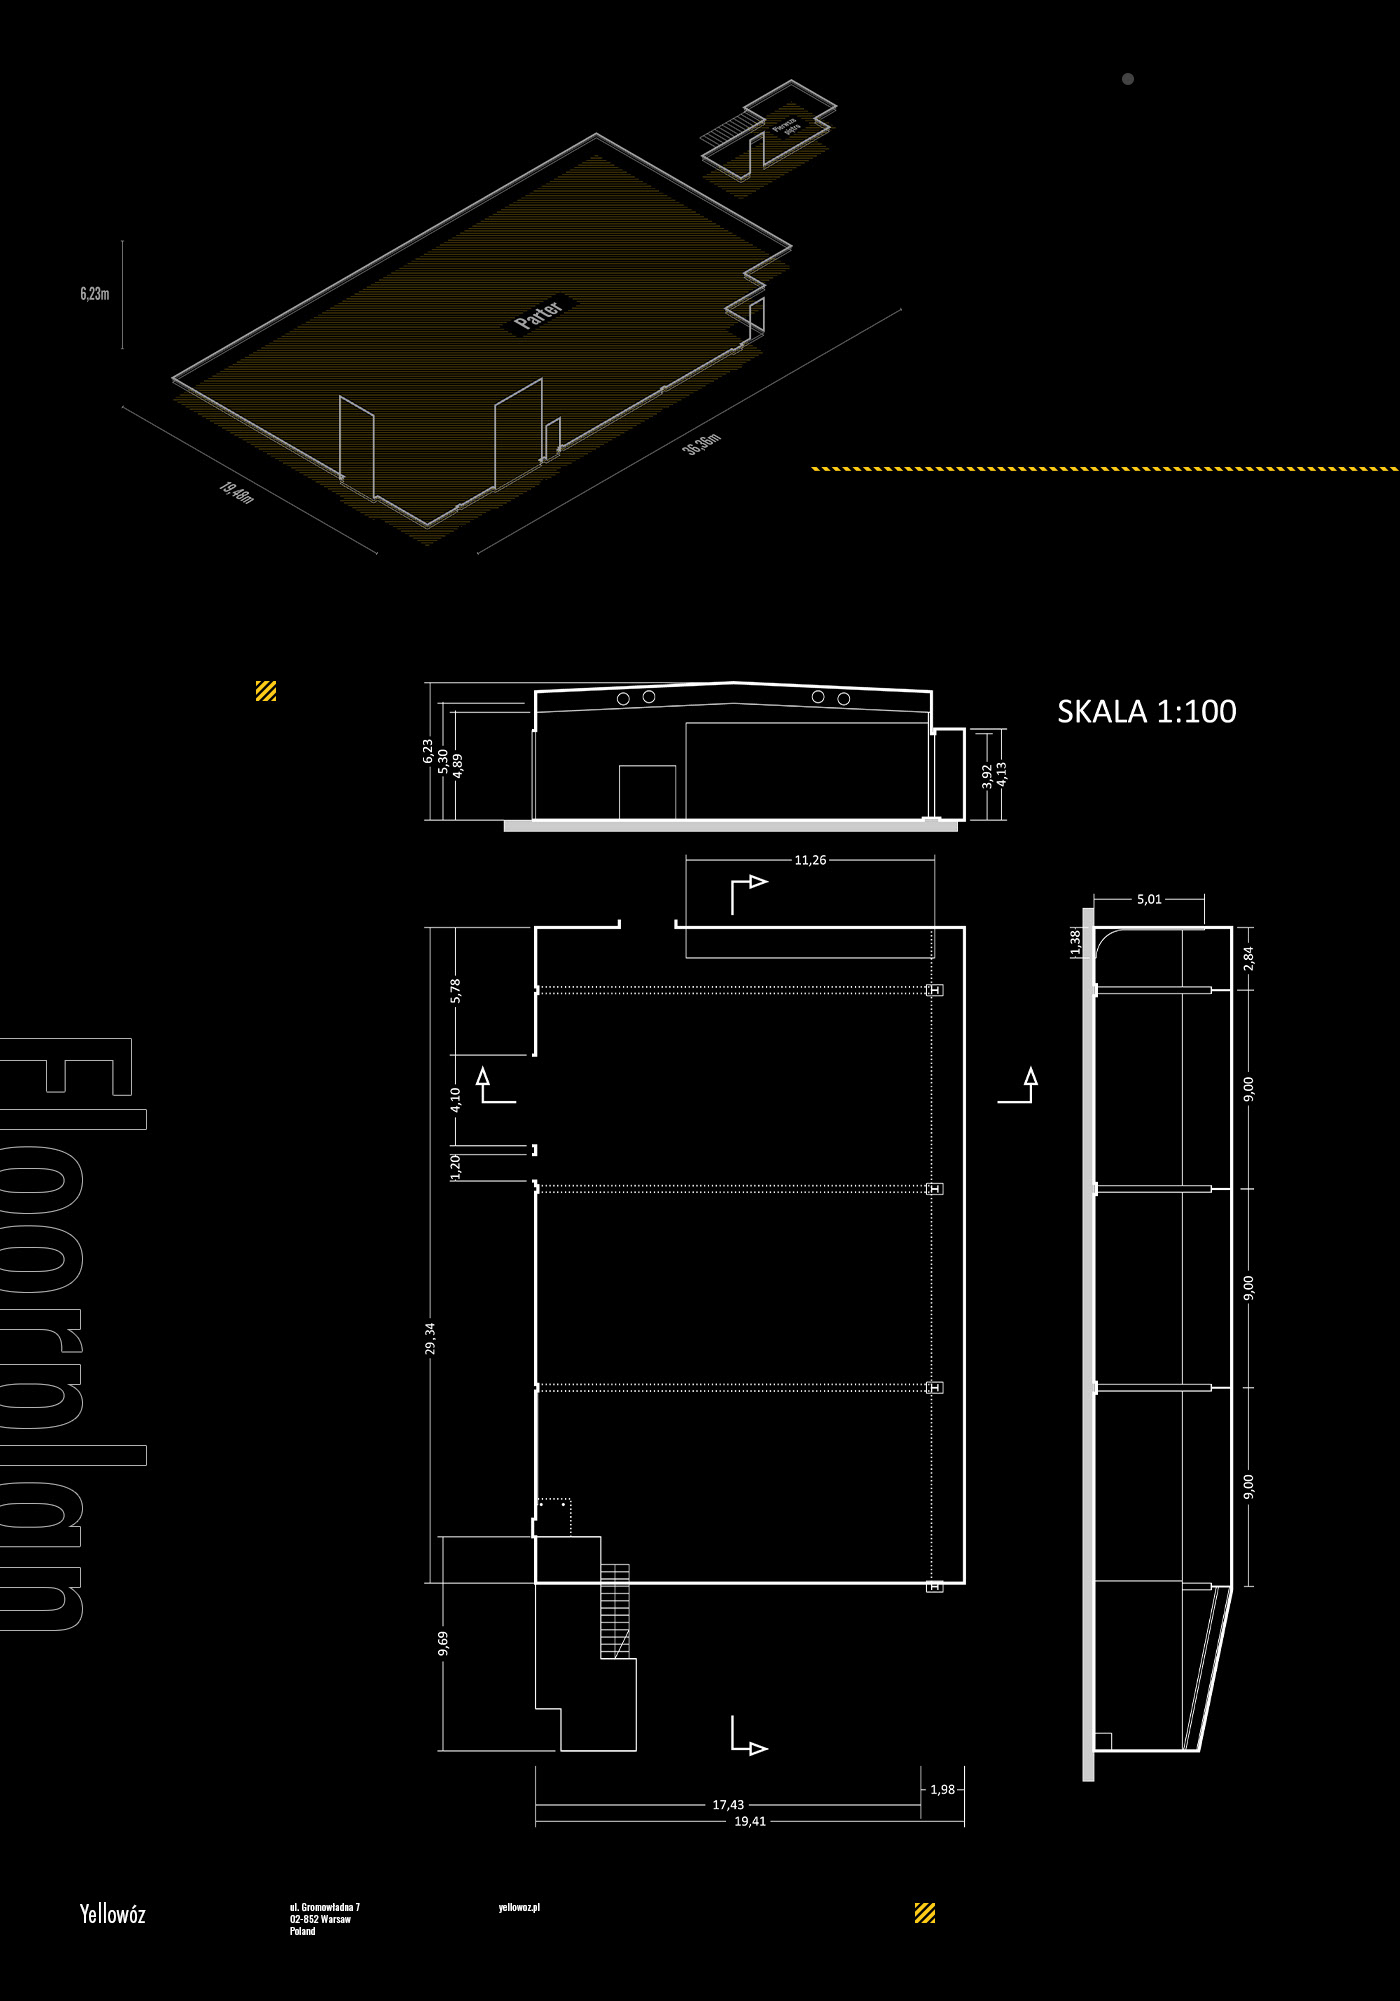 Floorplan and isometric view of a movie production space on a dark background